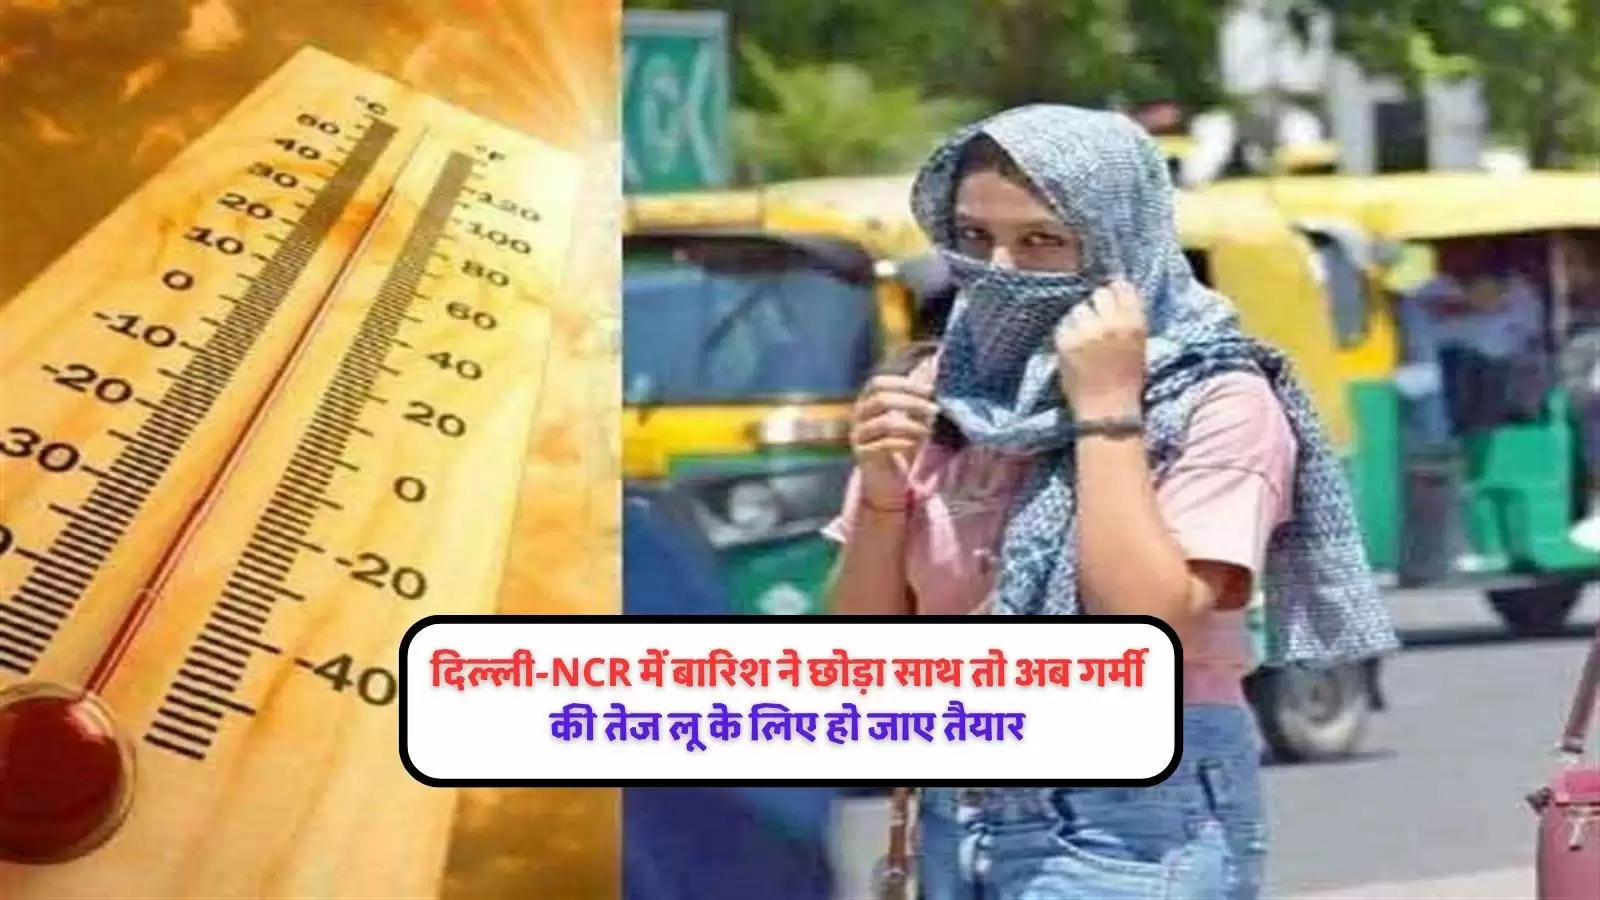 delhi-ncr-weather-forecast-rainfall-and-heatwave-updates-know-what-experts-say